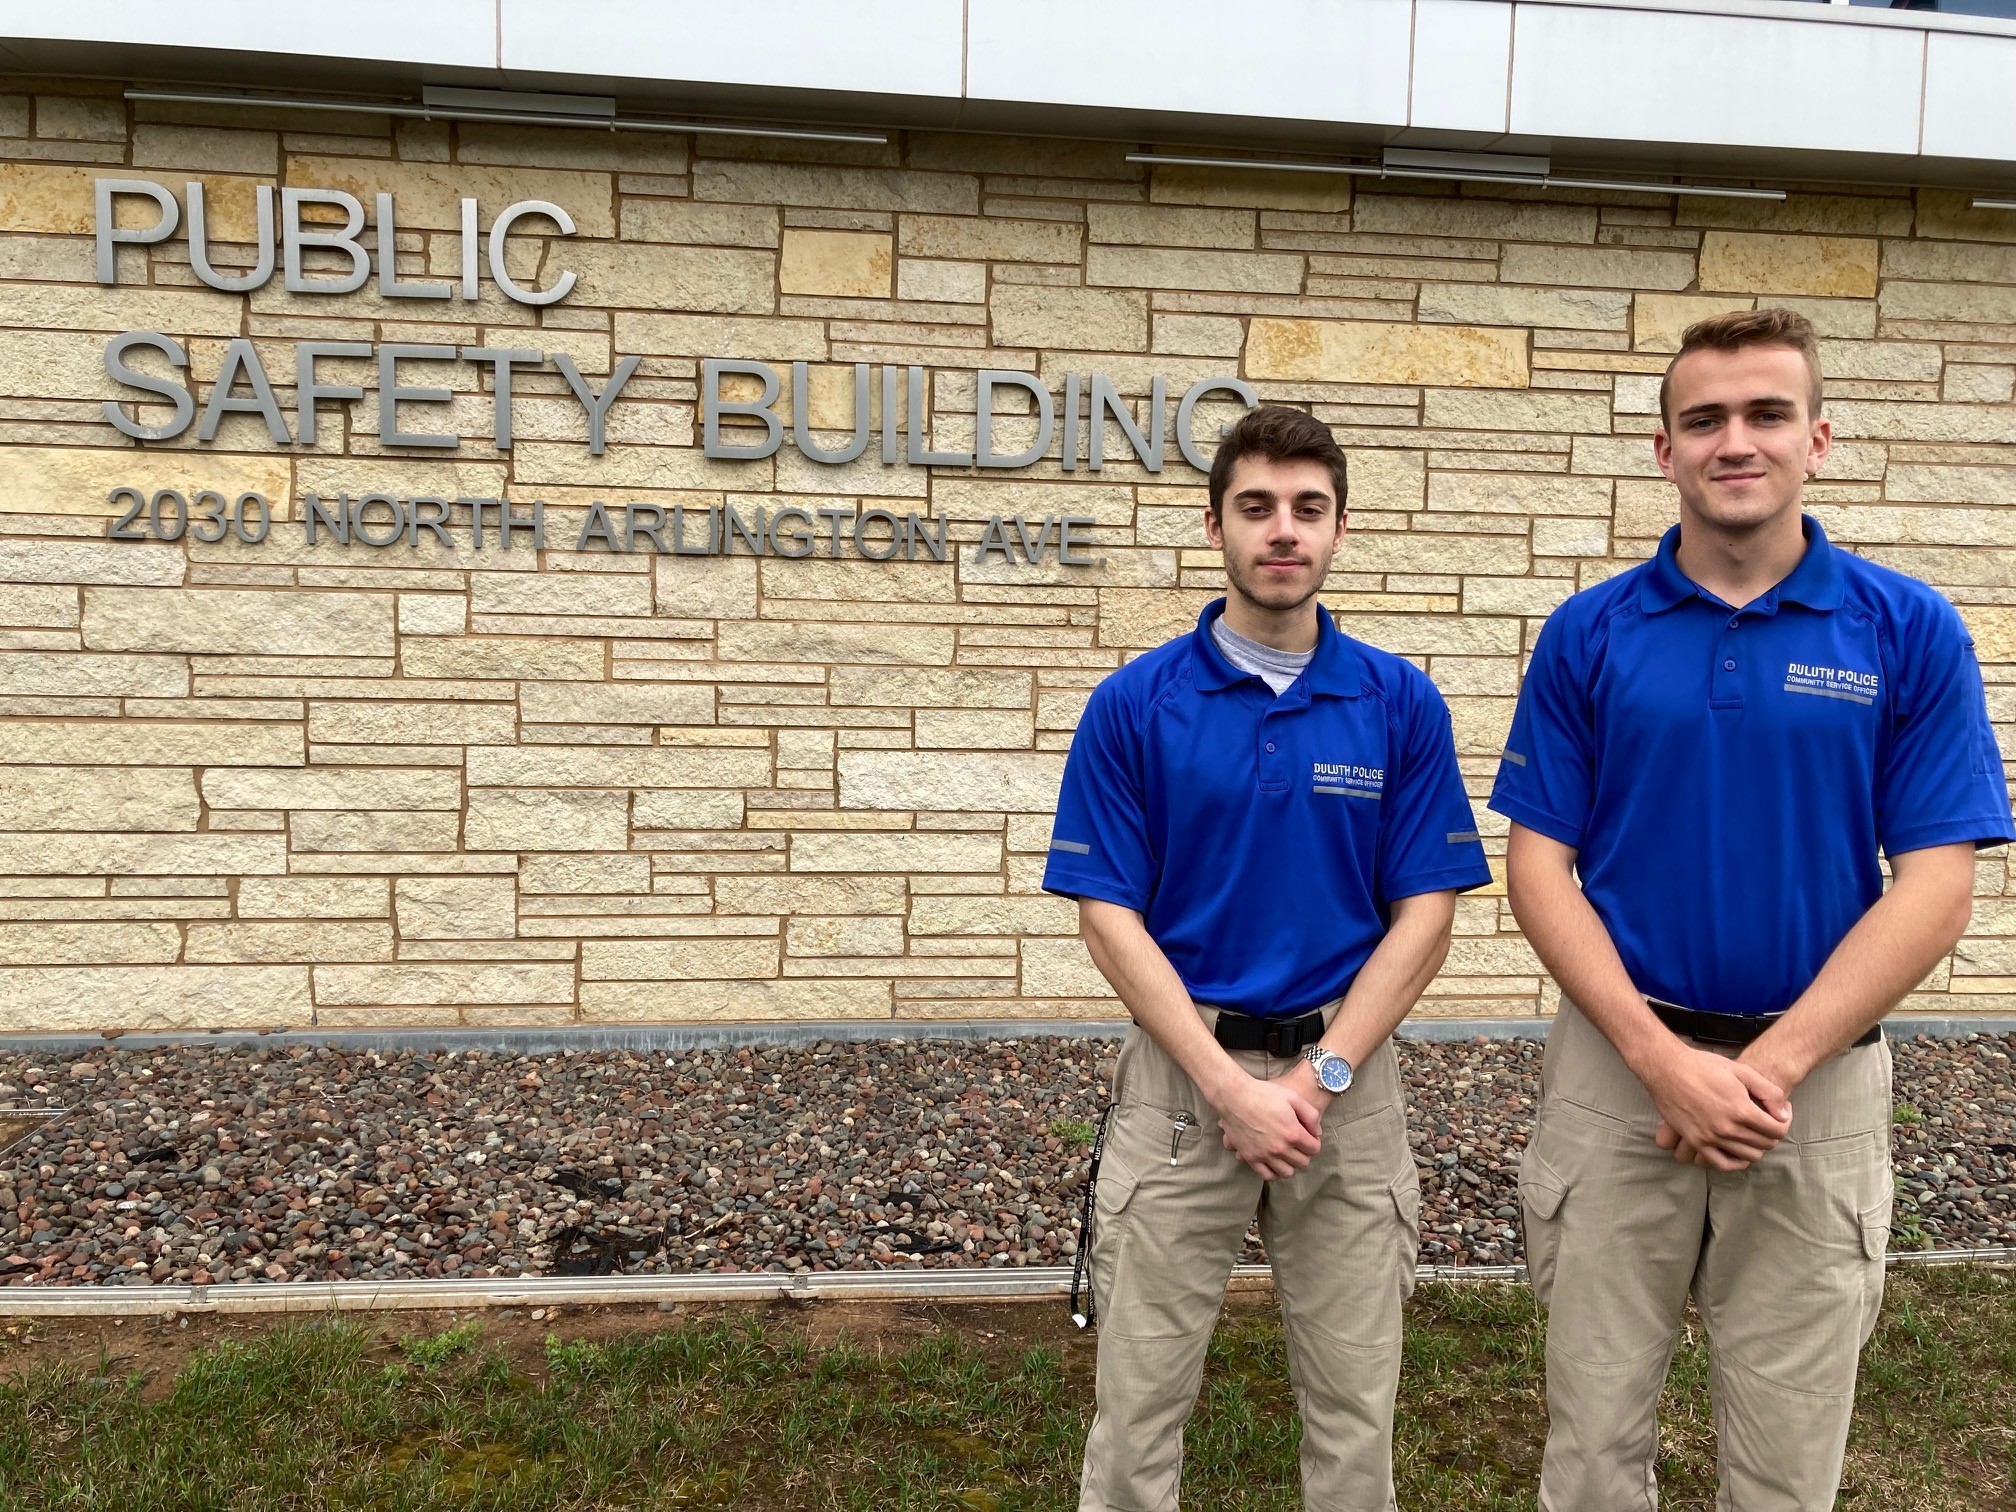 Community Service Officers Ibrihim Carson and Ryan Nowacki respond to a variety of low-level calls for service.